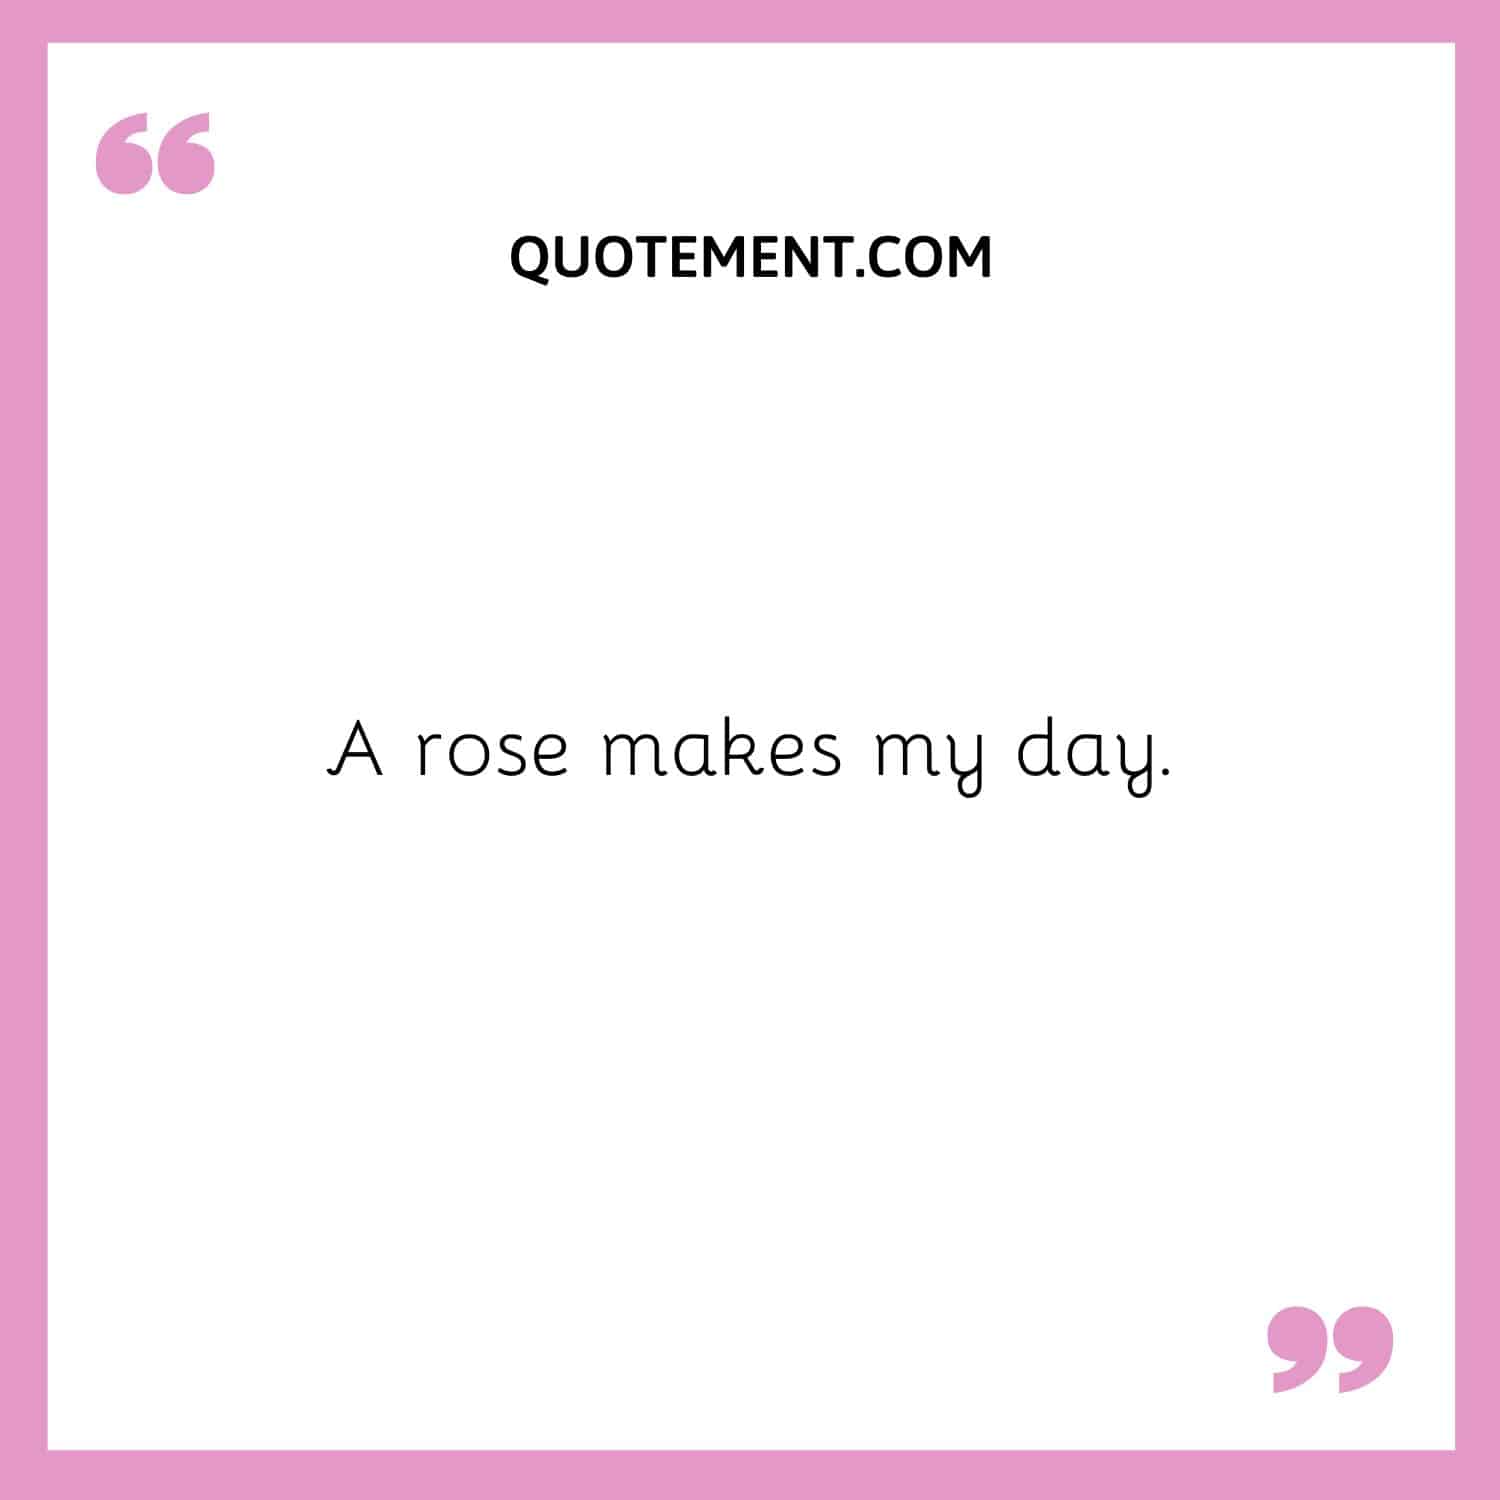 A rose makes my day